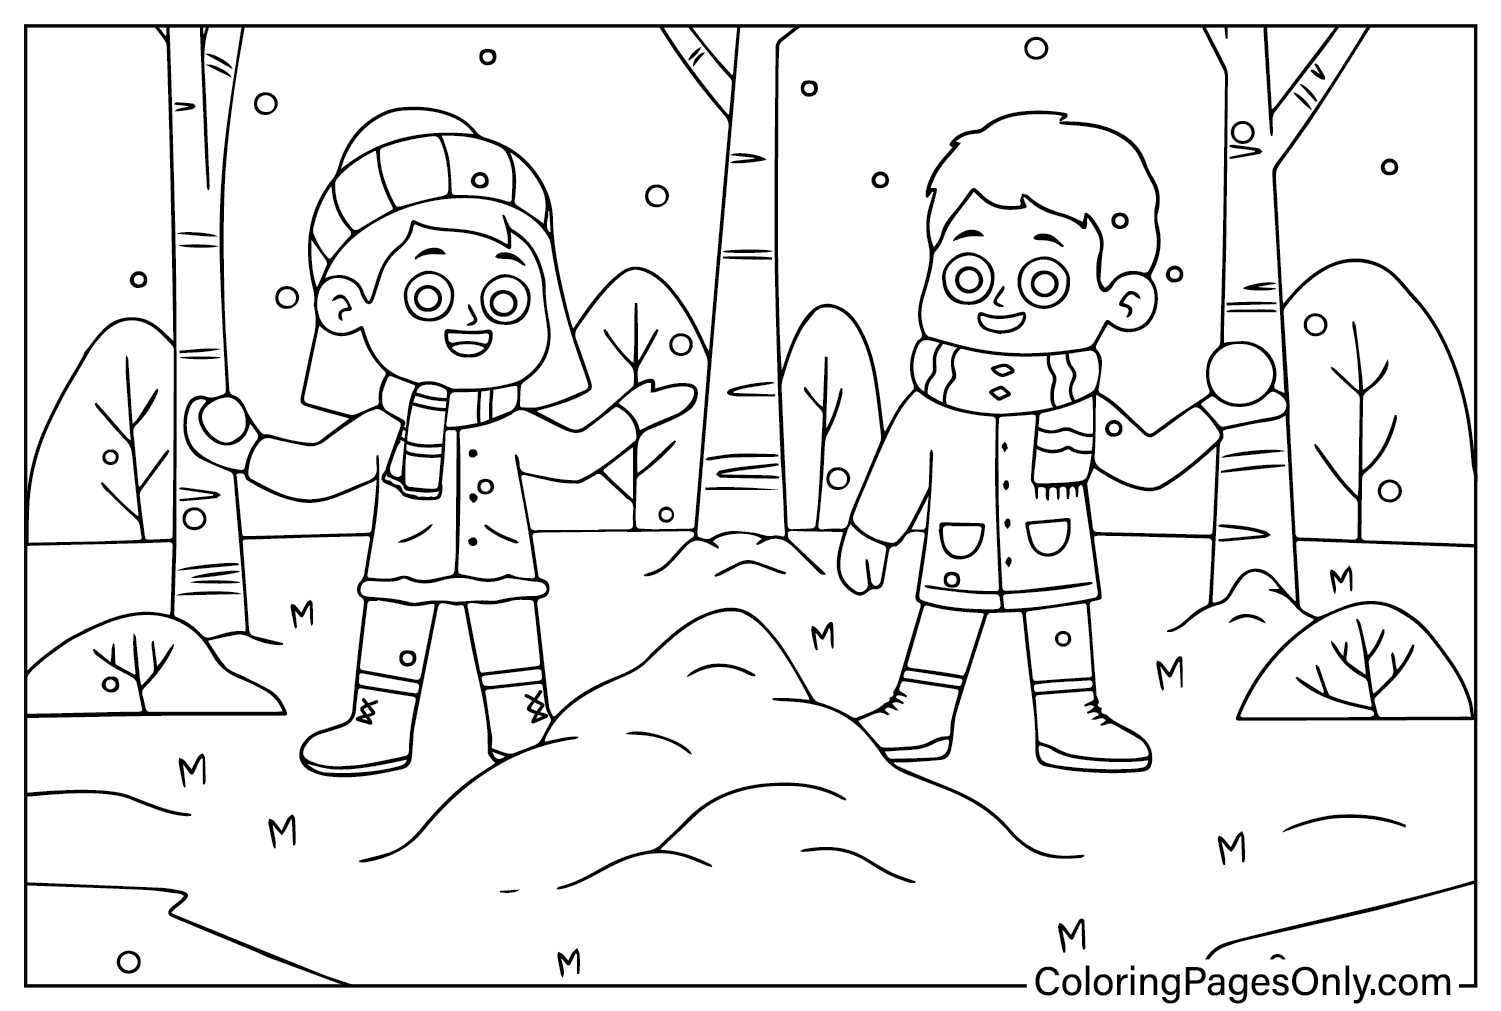 Winter Coloring Pages for Kids